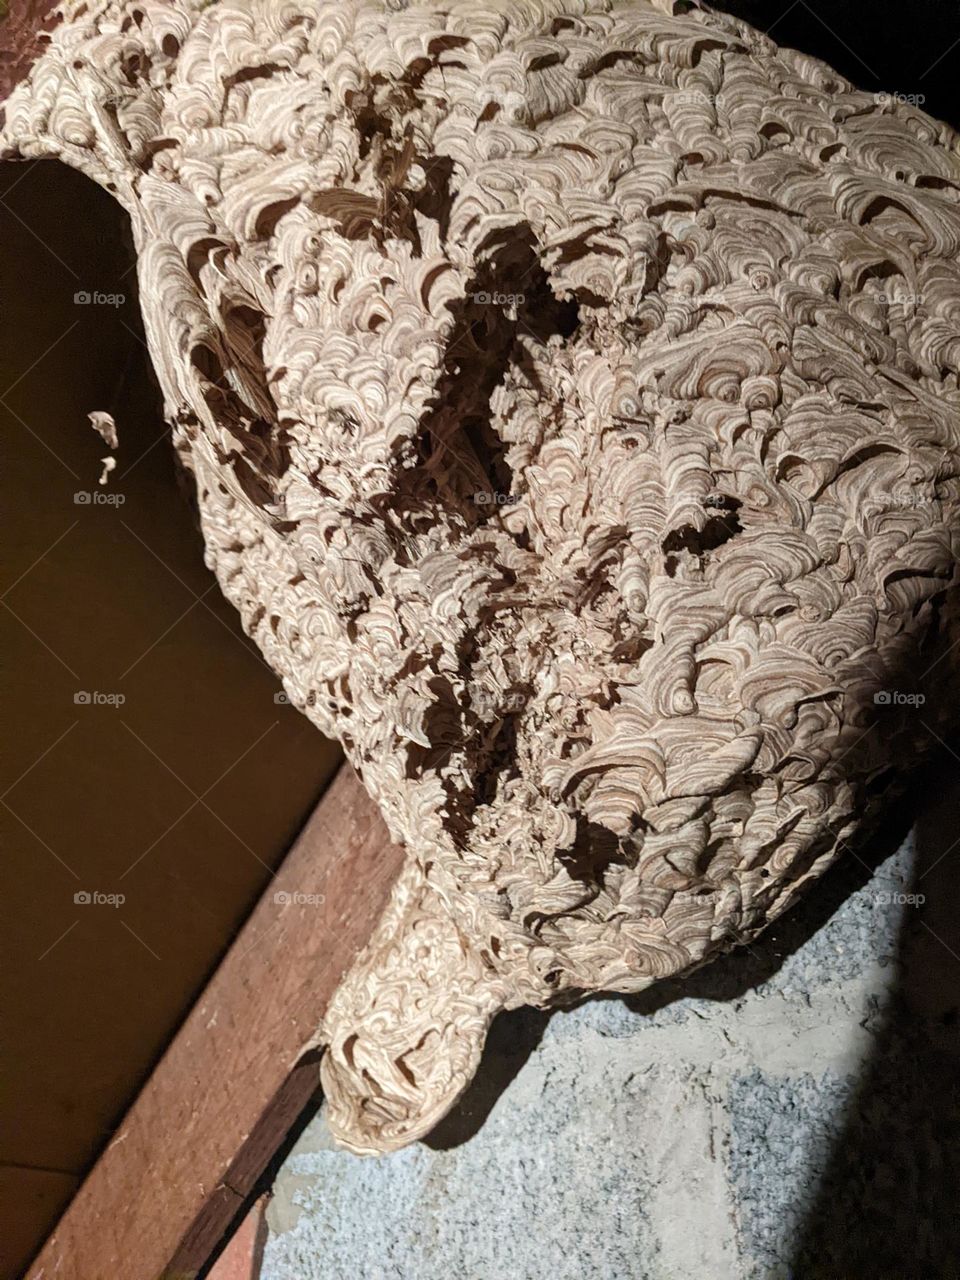 A giant bees nest under a roof inside a home